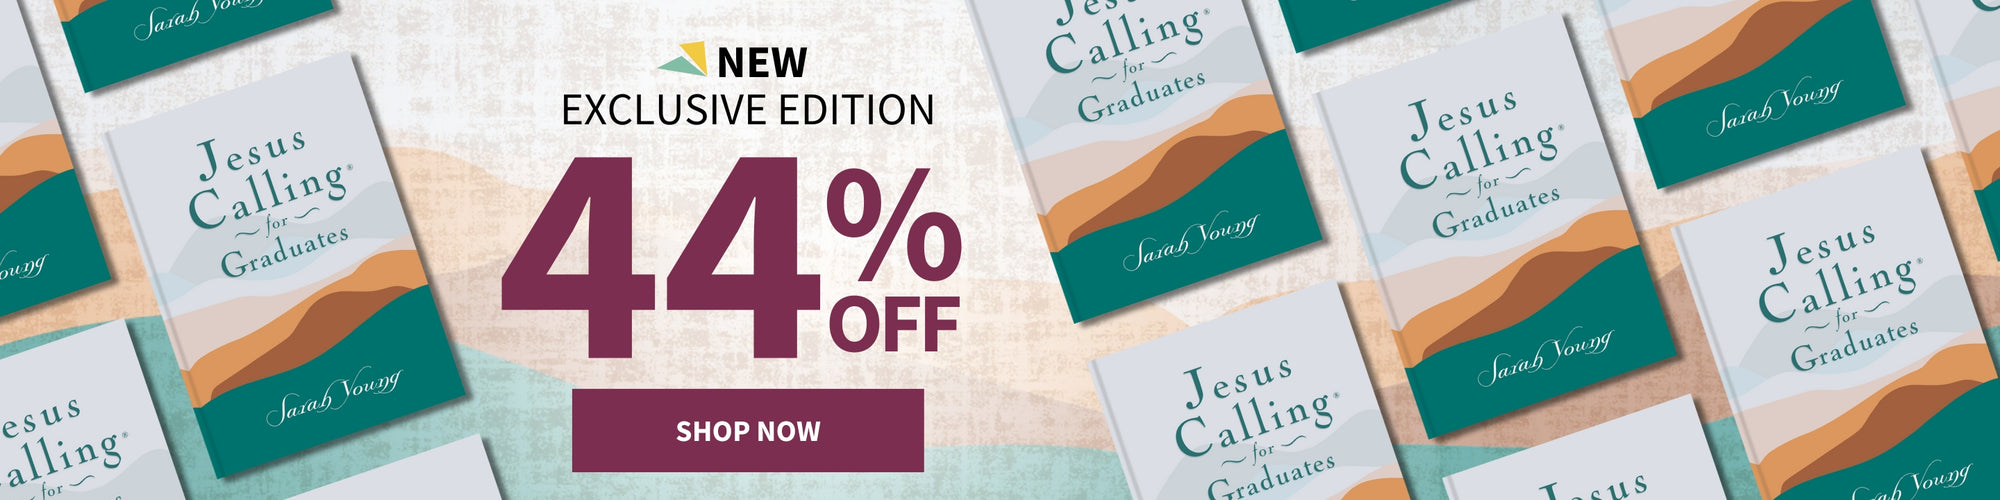 Jesus Calling for Graduates New Exclusive Edition 44% off